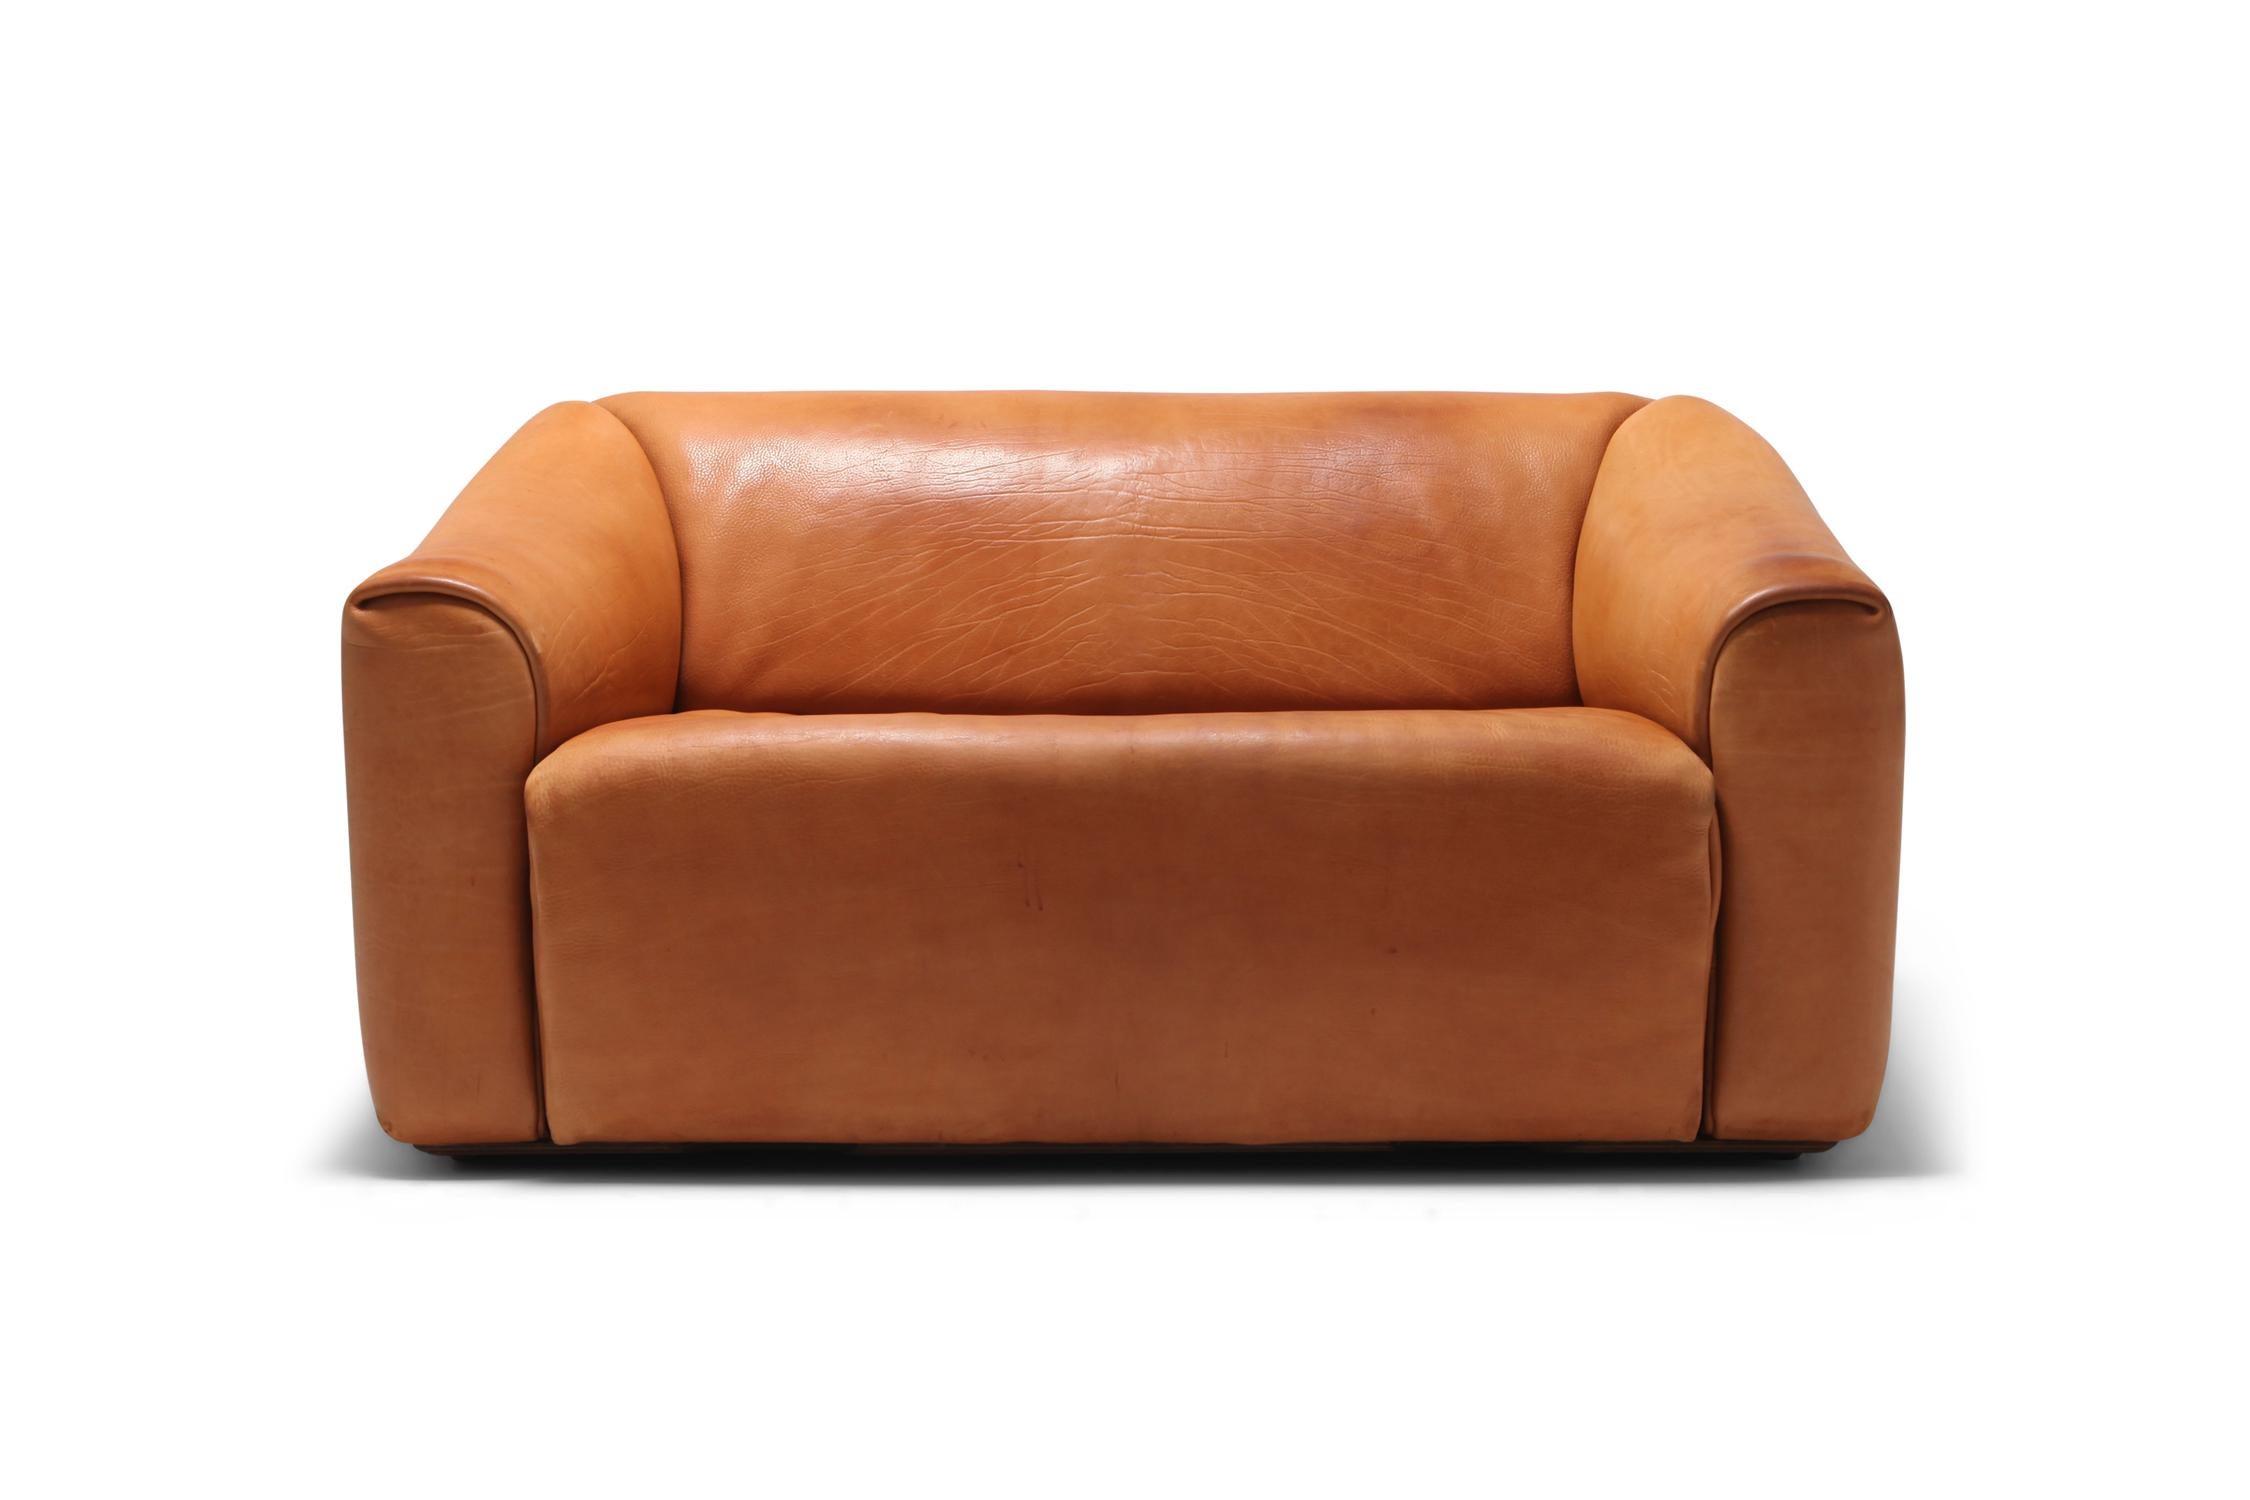 Cognac leather two-seat sofa by Swiss manufacturer De Sede.
Bullhide leather with retractable seating for an even more comfortable seat. 

The DS 47 model is a true design classic and is still in production. This is an original model with tons of